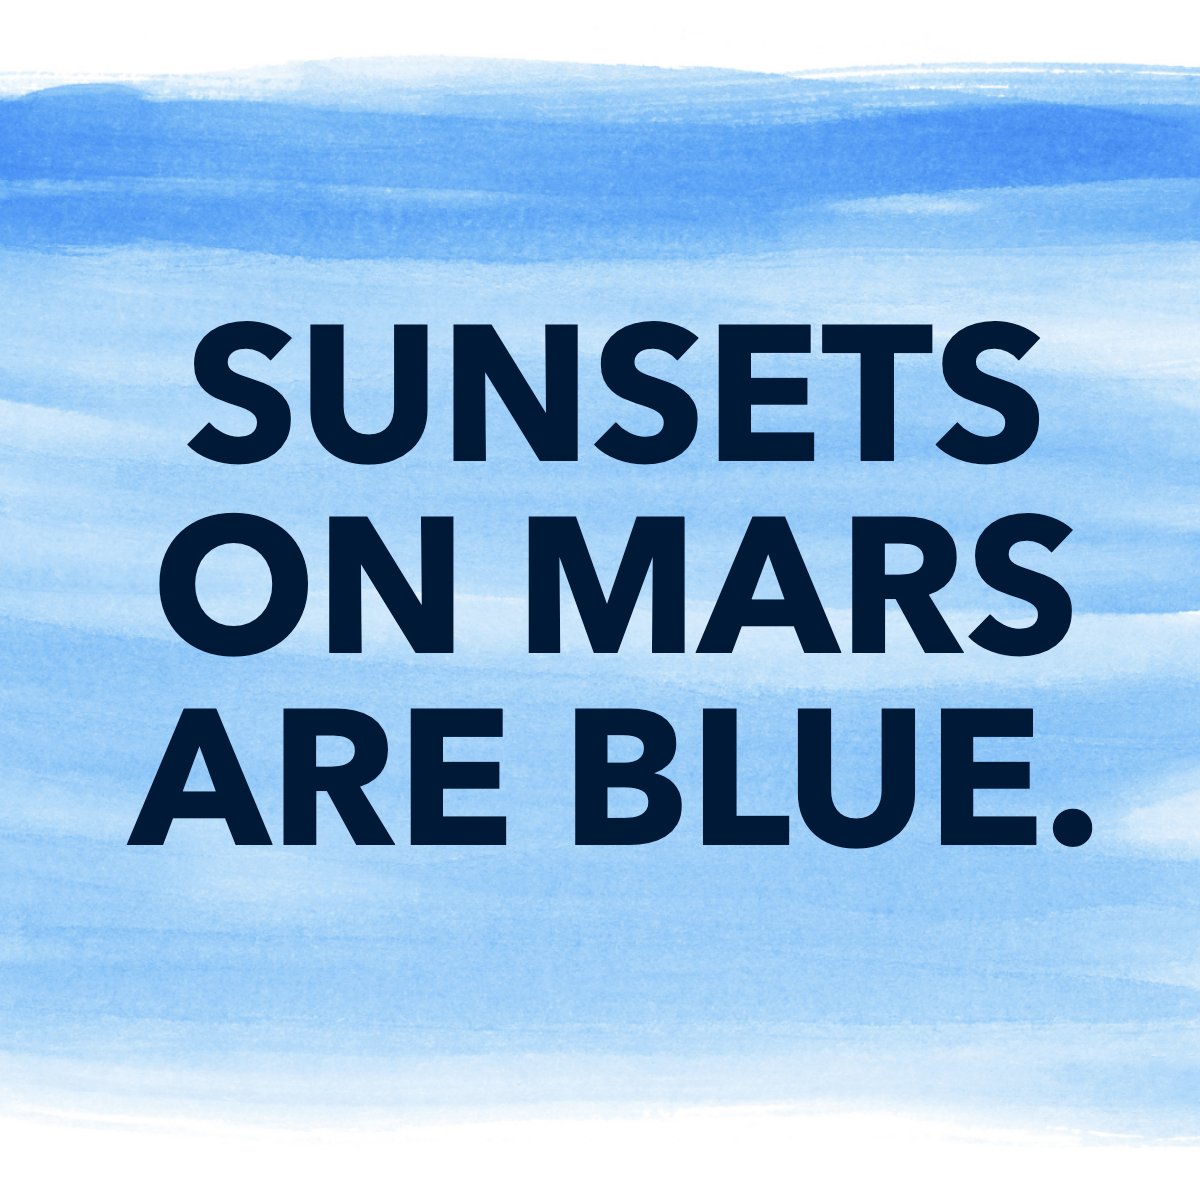 Did you know this? 😮

#fact    #blue    #watercolor    #Sunset    #Mars
#YourPerfectHome #CRayBrower #SanJoaquinCounty #StocktonCA #RealEstate